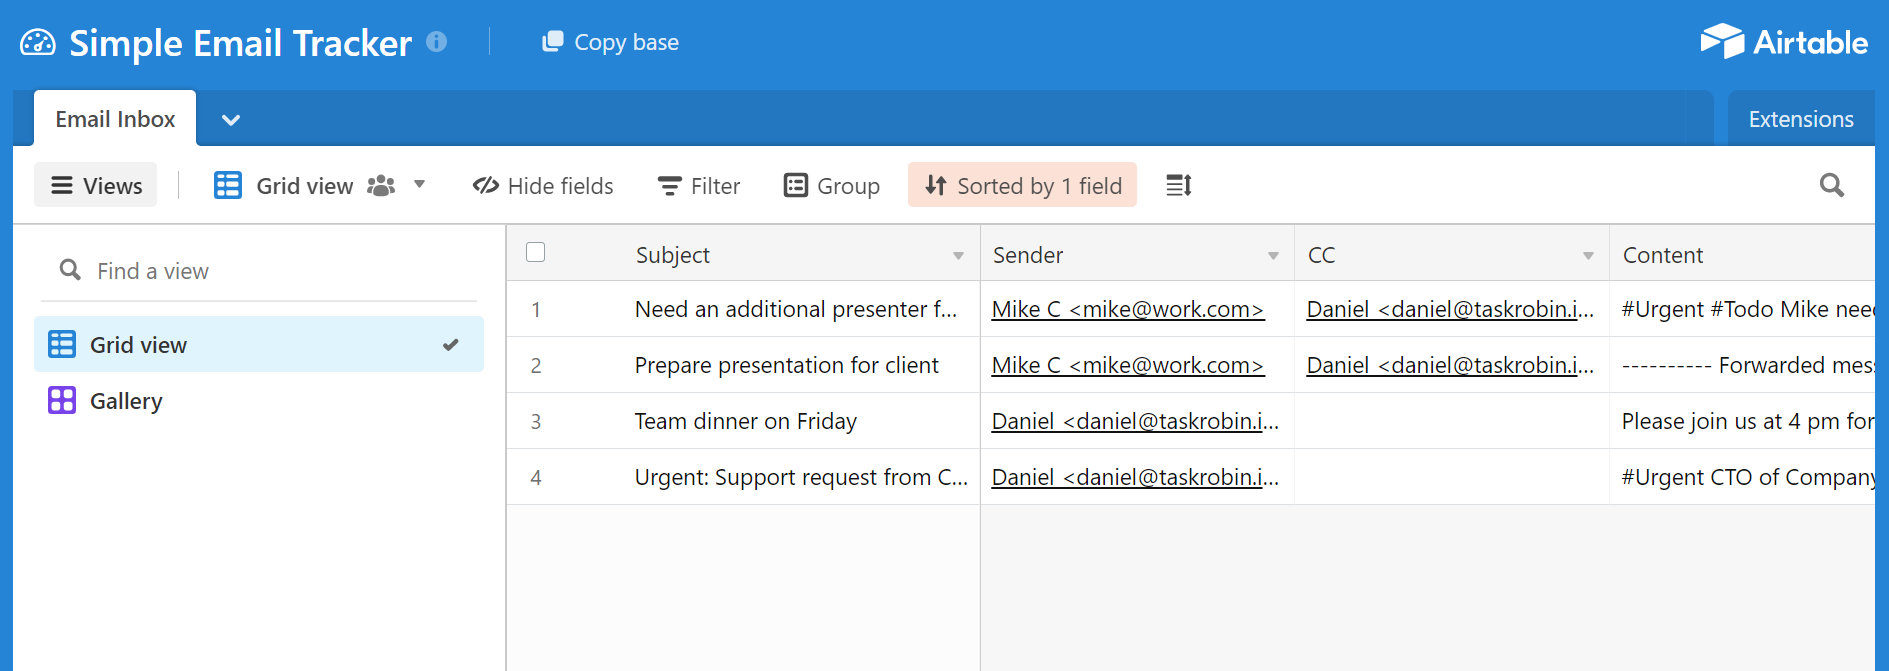 TaskRobin saves emails to Airtable